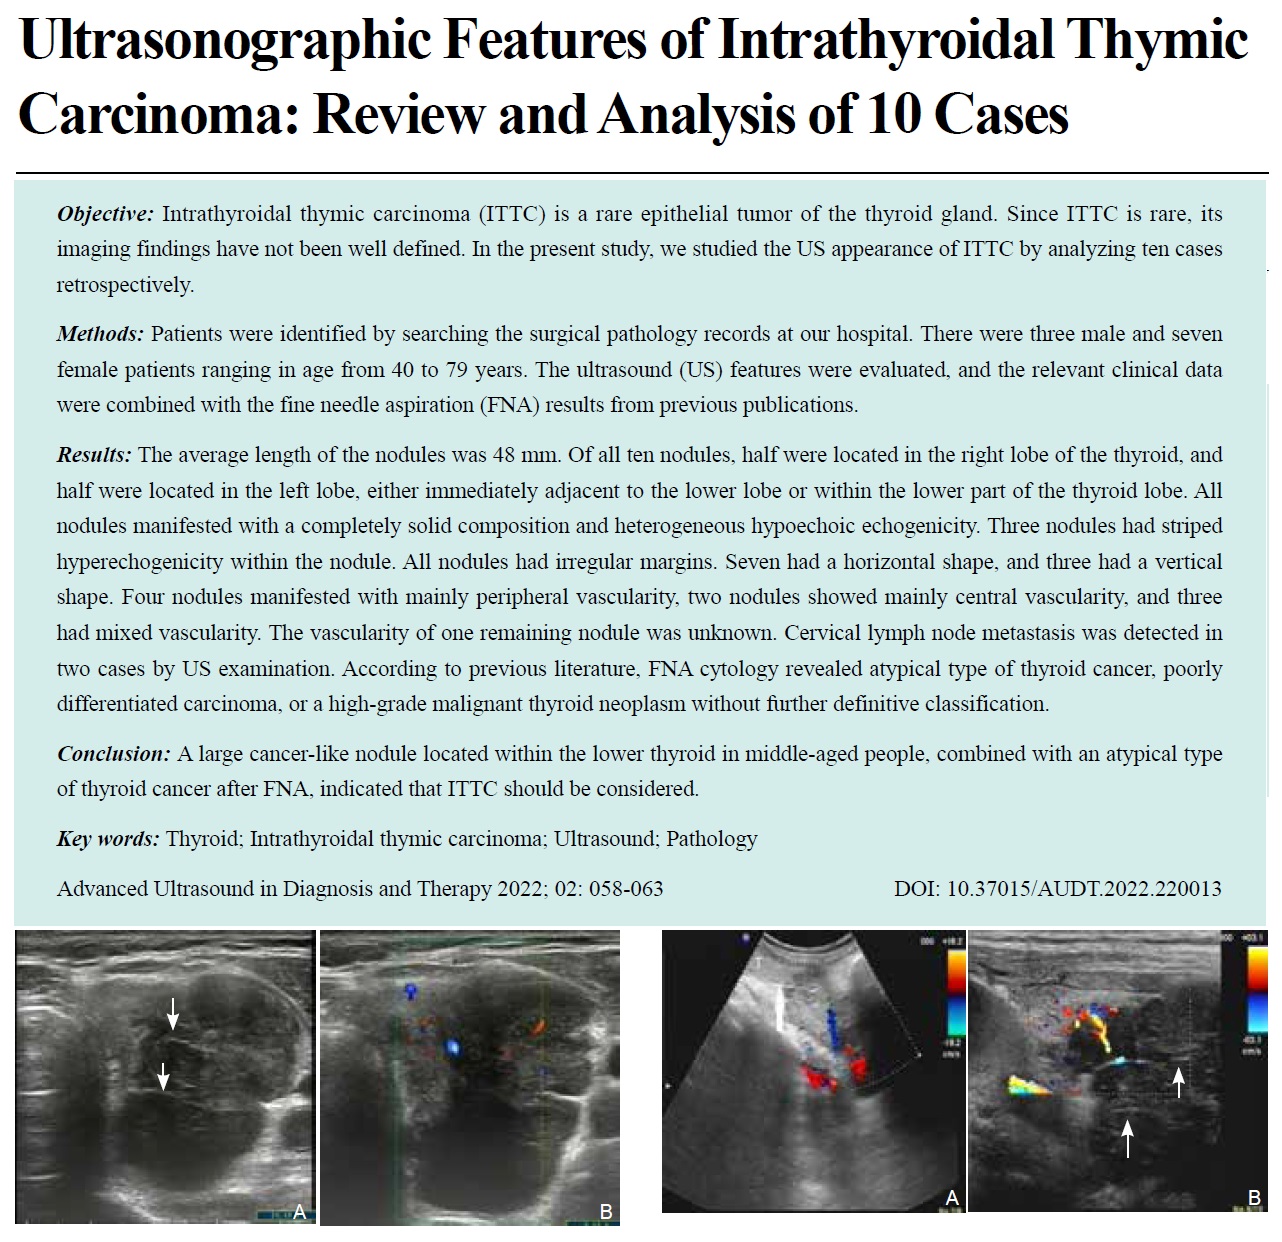 Ultrasonographic Features of Intrathyroidal Thymic Carcinoma: Review and Analysis of 10 Cases